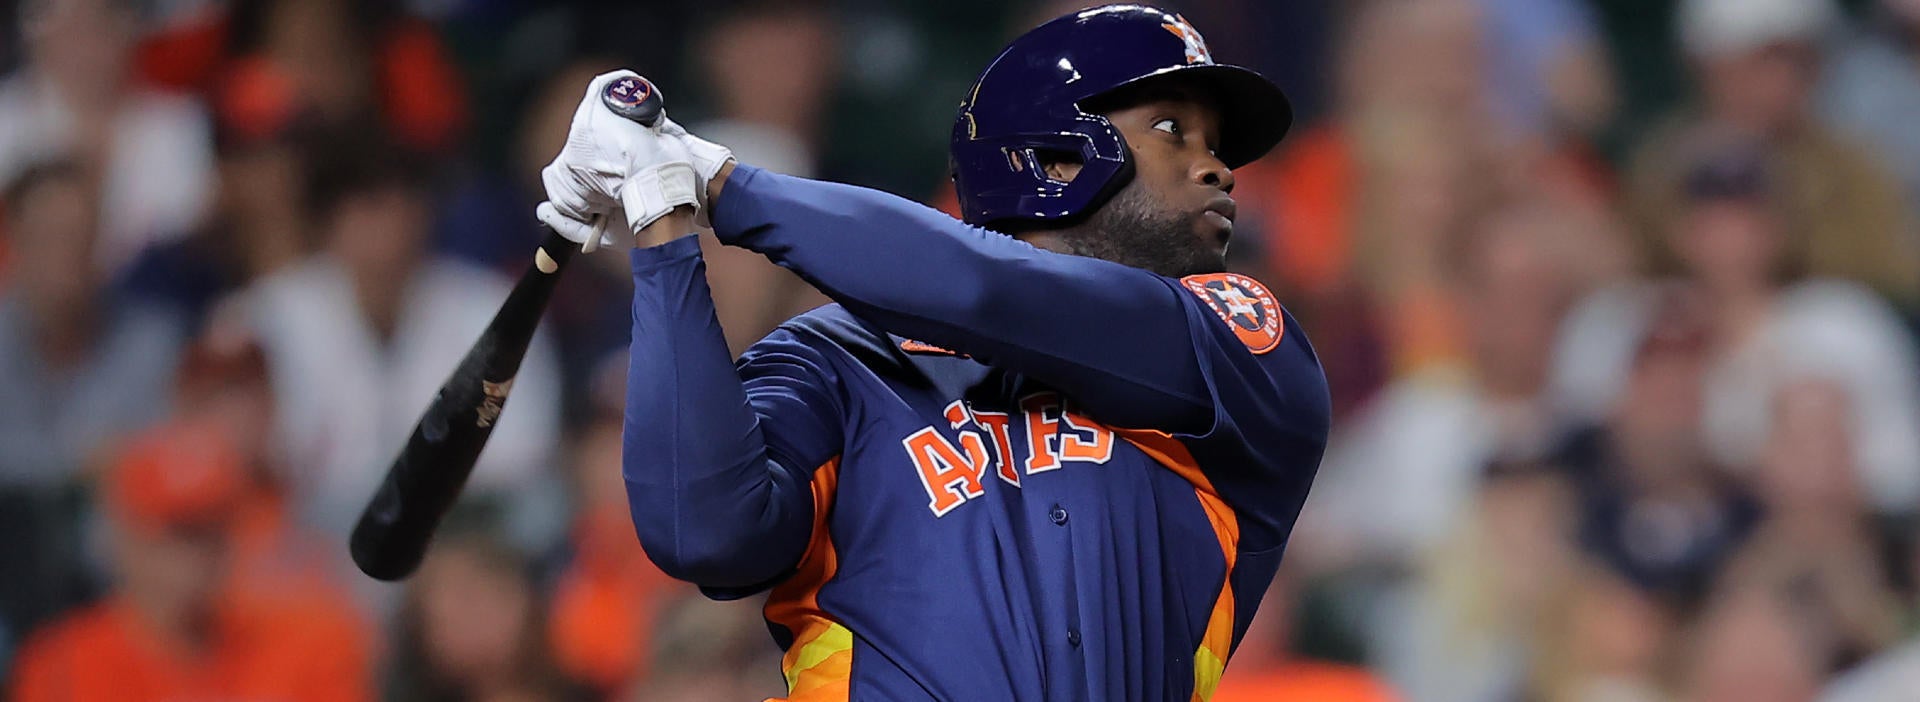 Astros vs. Twins ALDS Game 4 Wednesday MLB probable pitchers, odds, trends: Bettors on Houston to advance, Yordan Alvarez to stay hot at plate